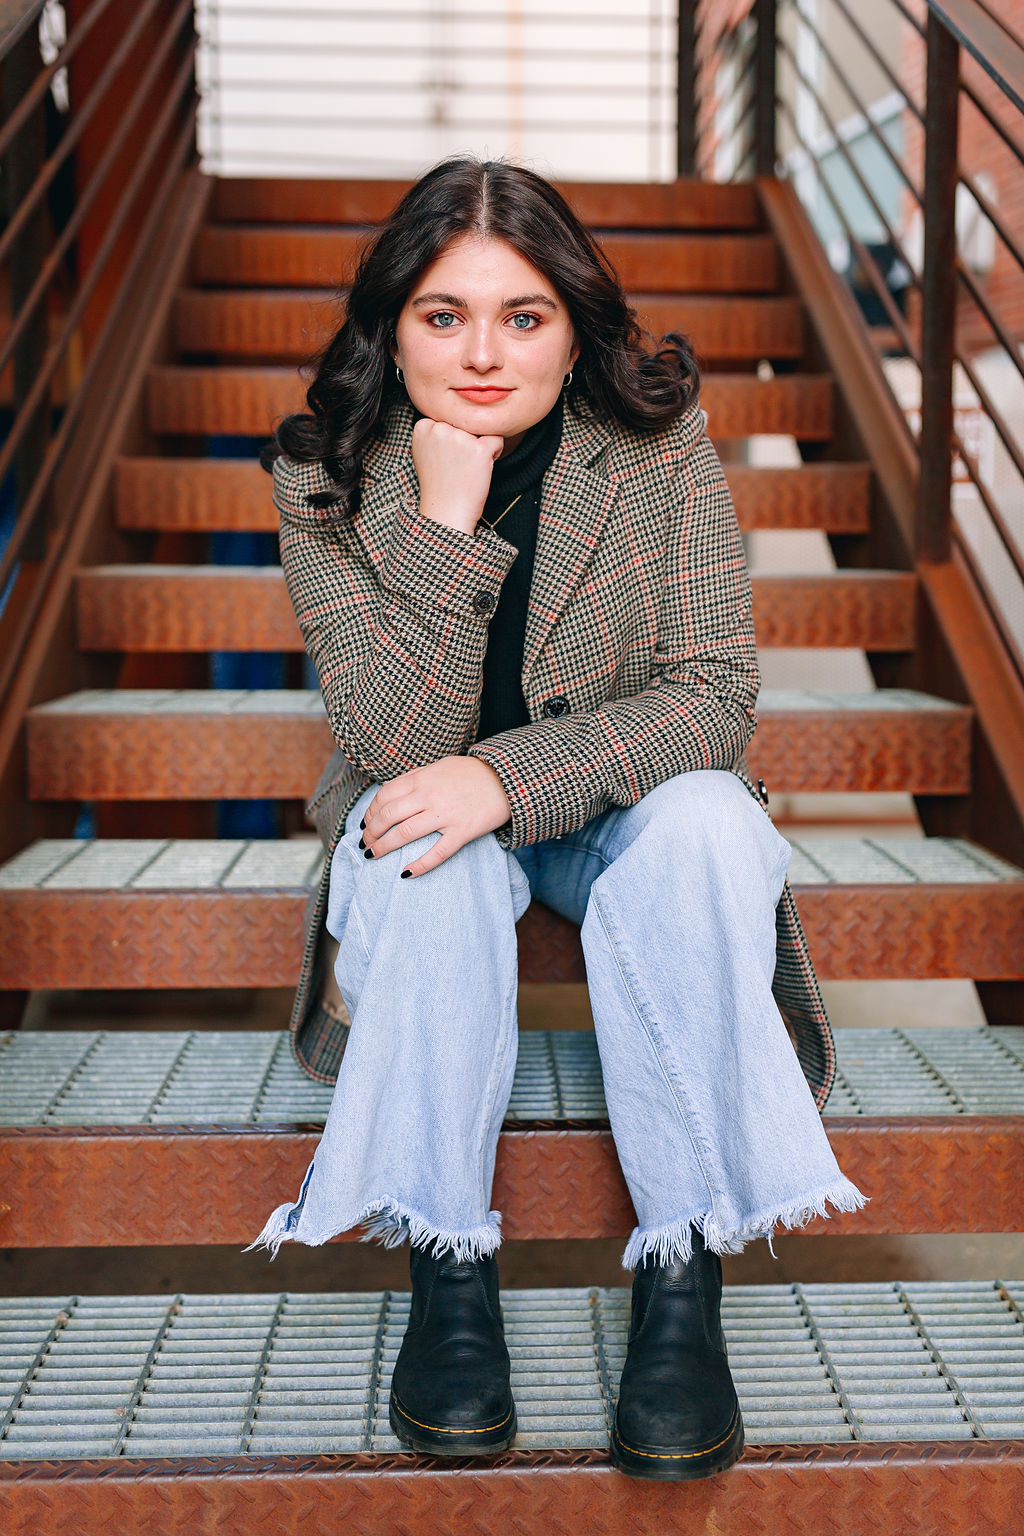 A high school senior sits in a plaid coat and jeans on some rusted stairs